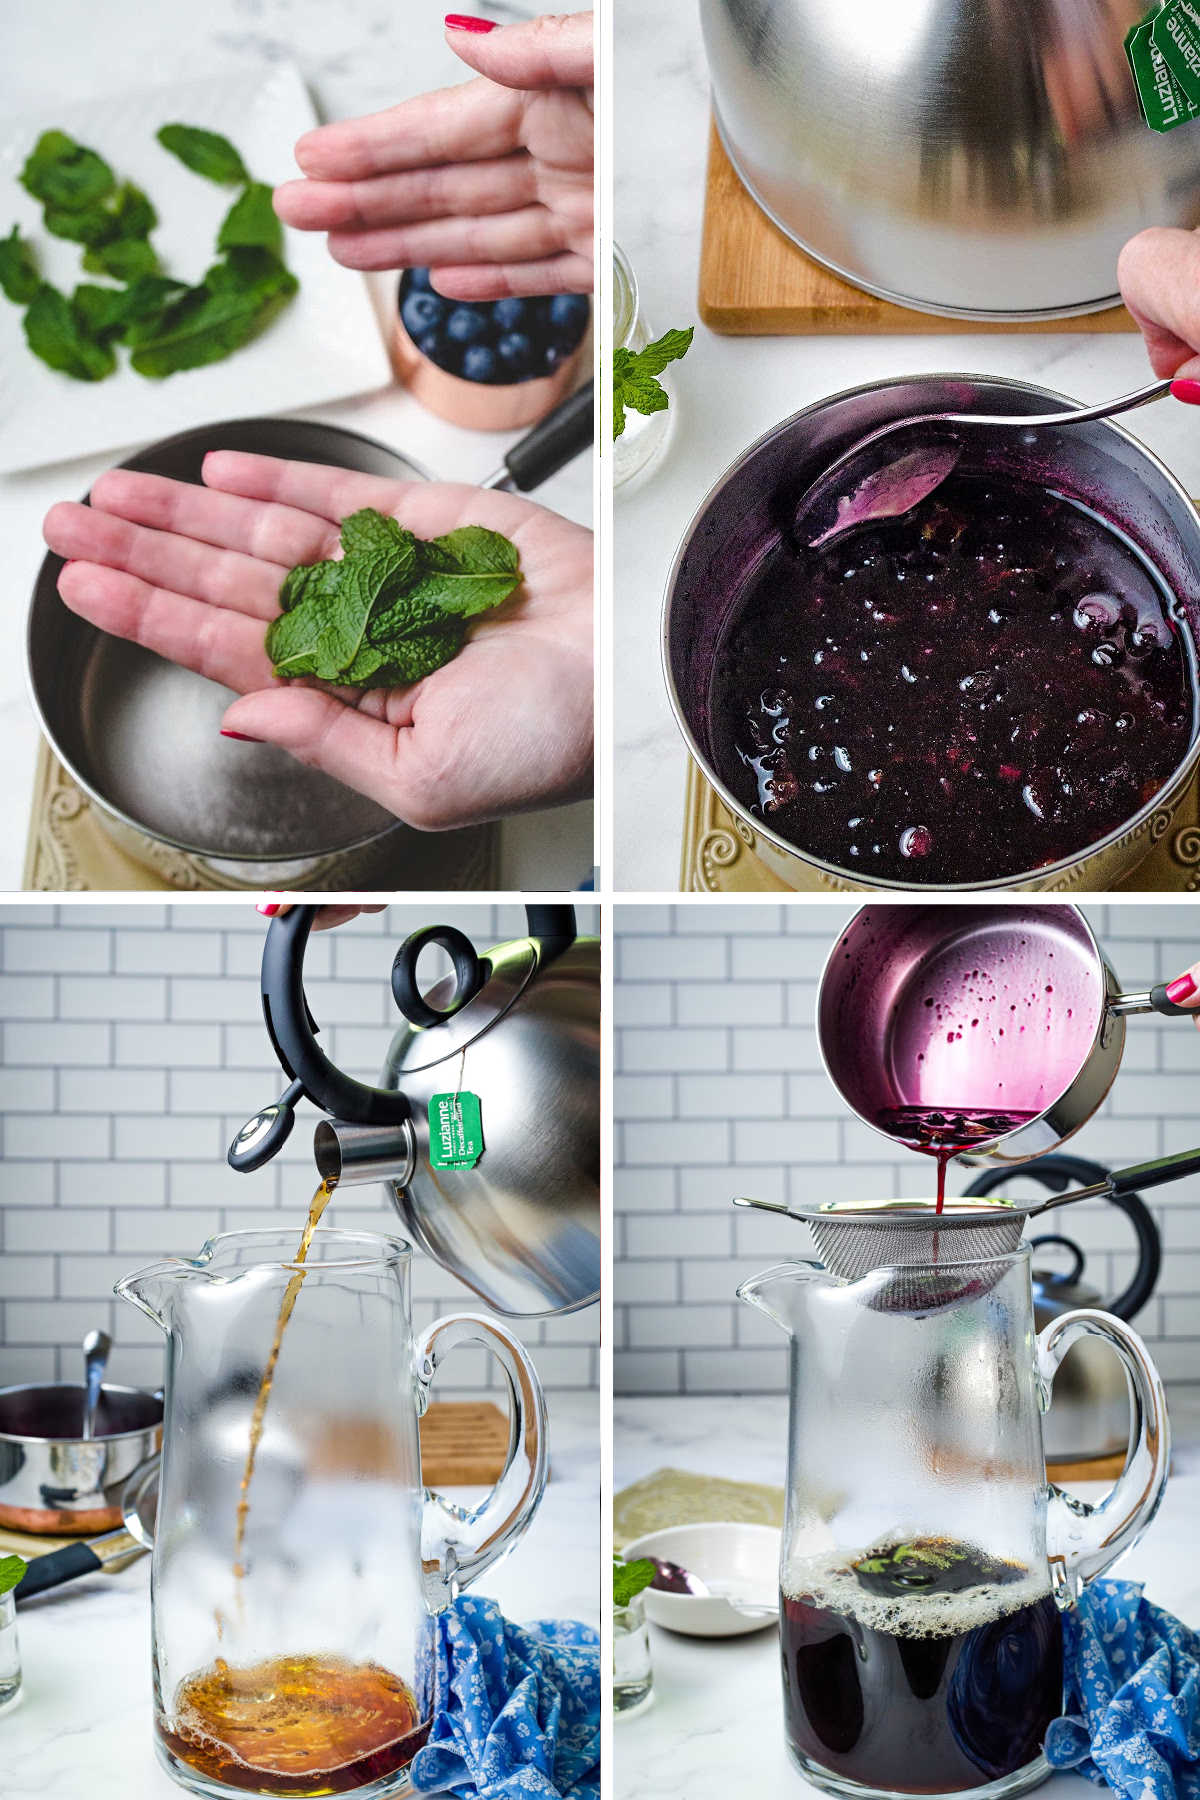 process steps for making blueberry tea: add mint leaves to simple syrup, add blueberries to simple syrup, brew tea, strain simple syrup.